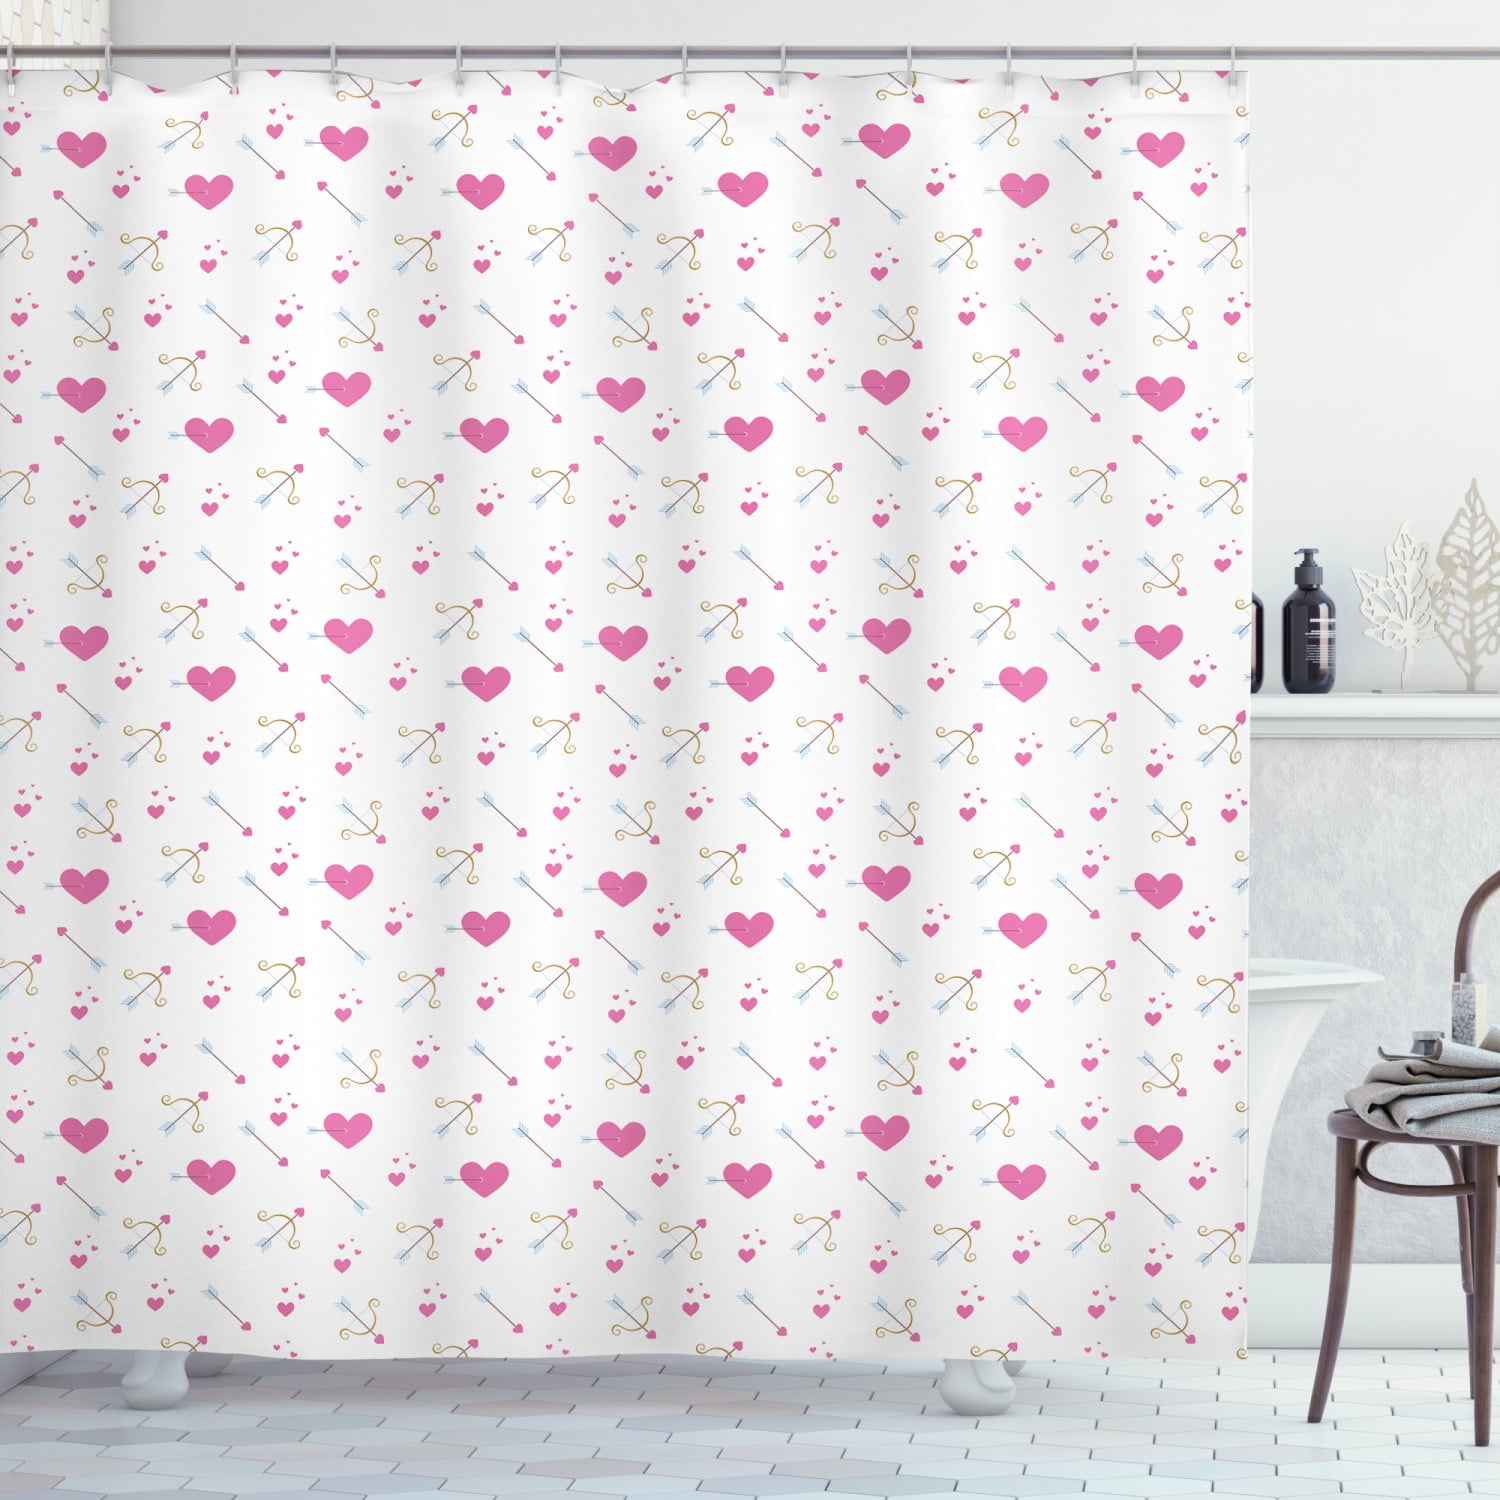 Details about   Hearts and Dot on White Fabric Shower Curtain Bathroom Waterproof for Lover 